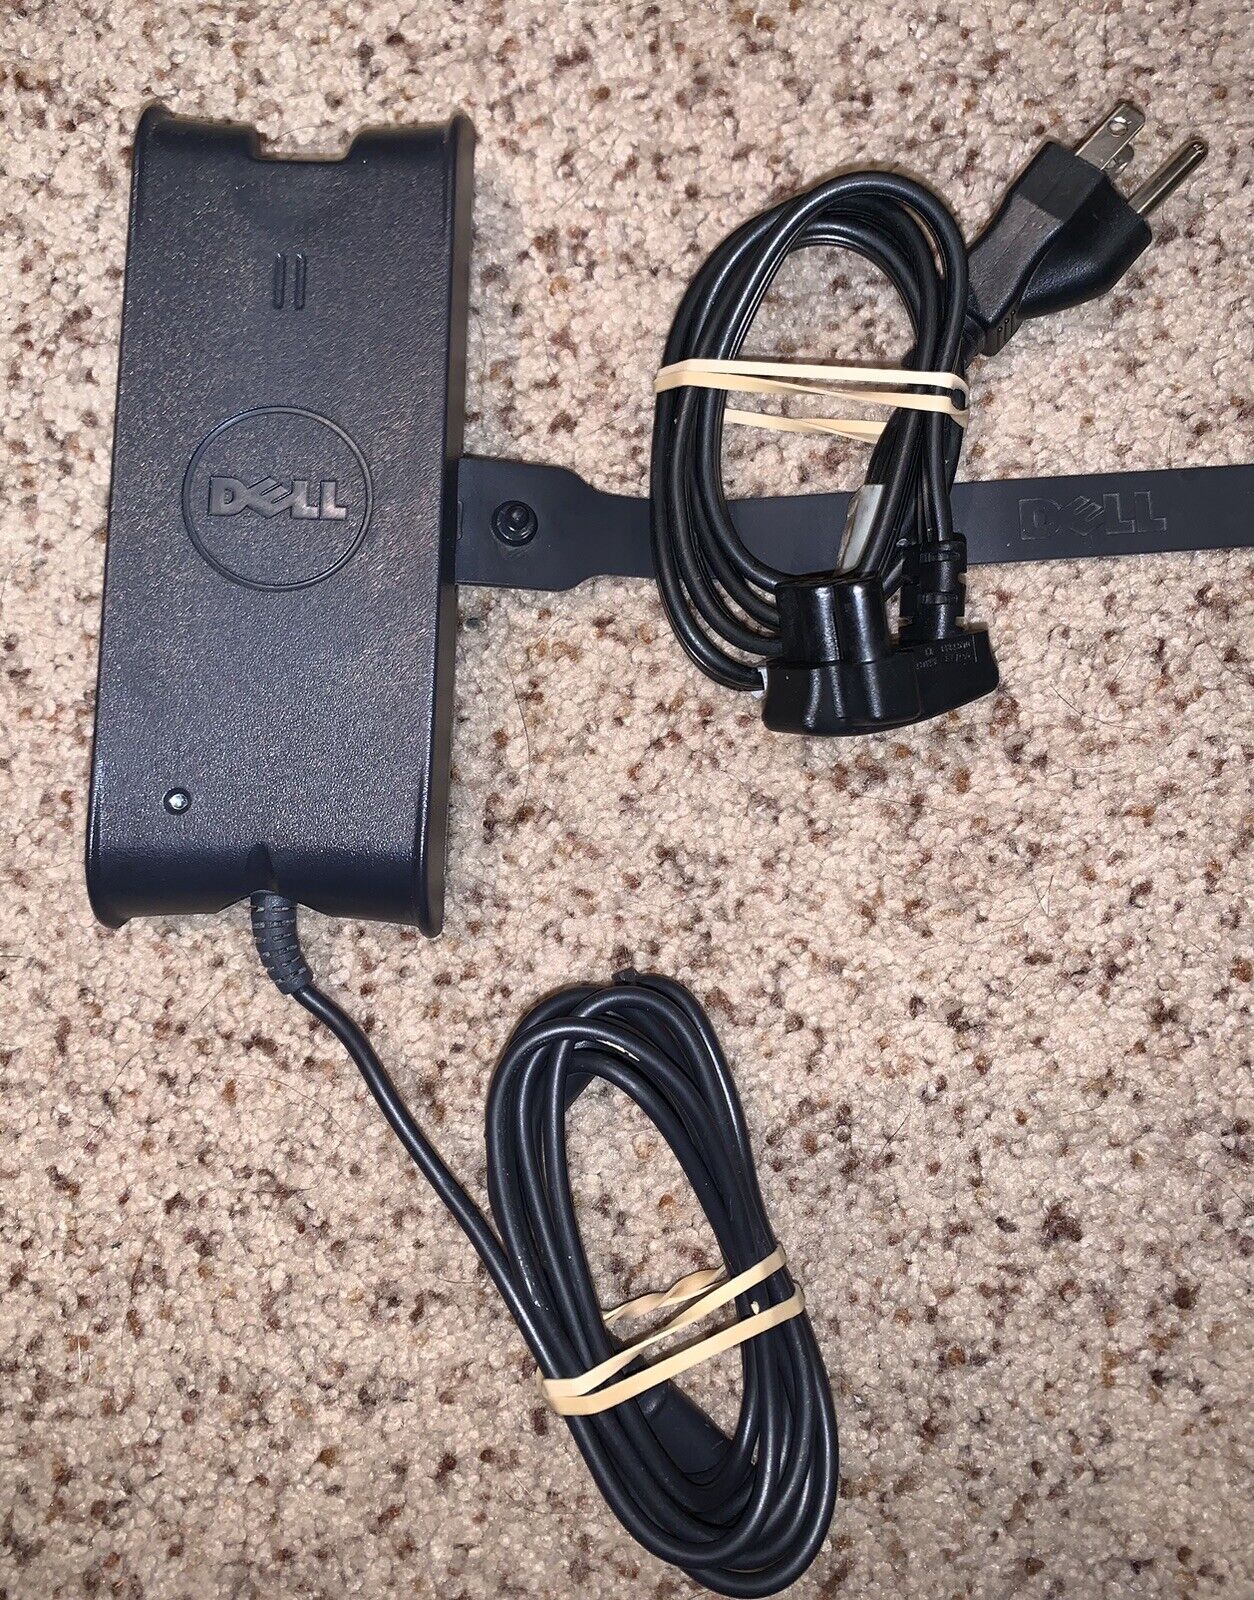 Genuine Dell Laptop Power Adapter Charger PA-1900-02D2 U7809